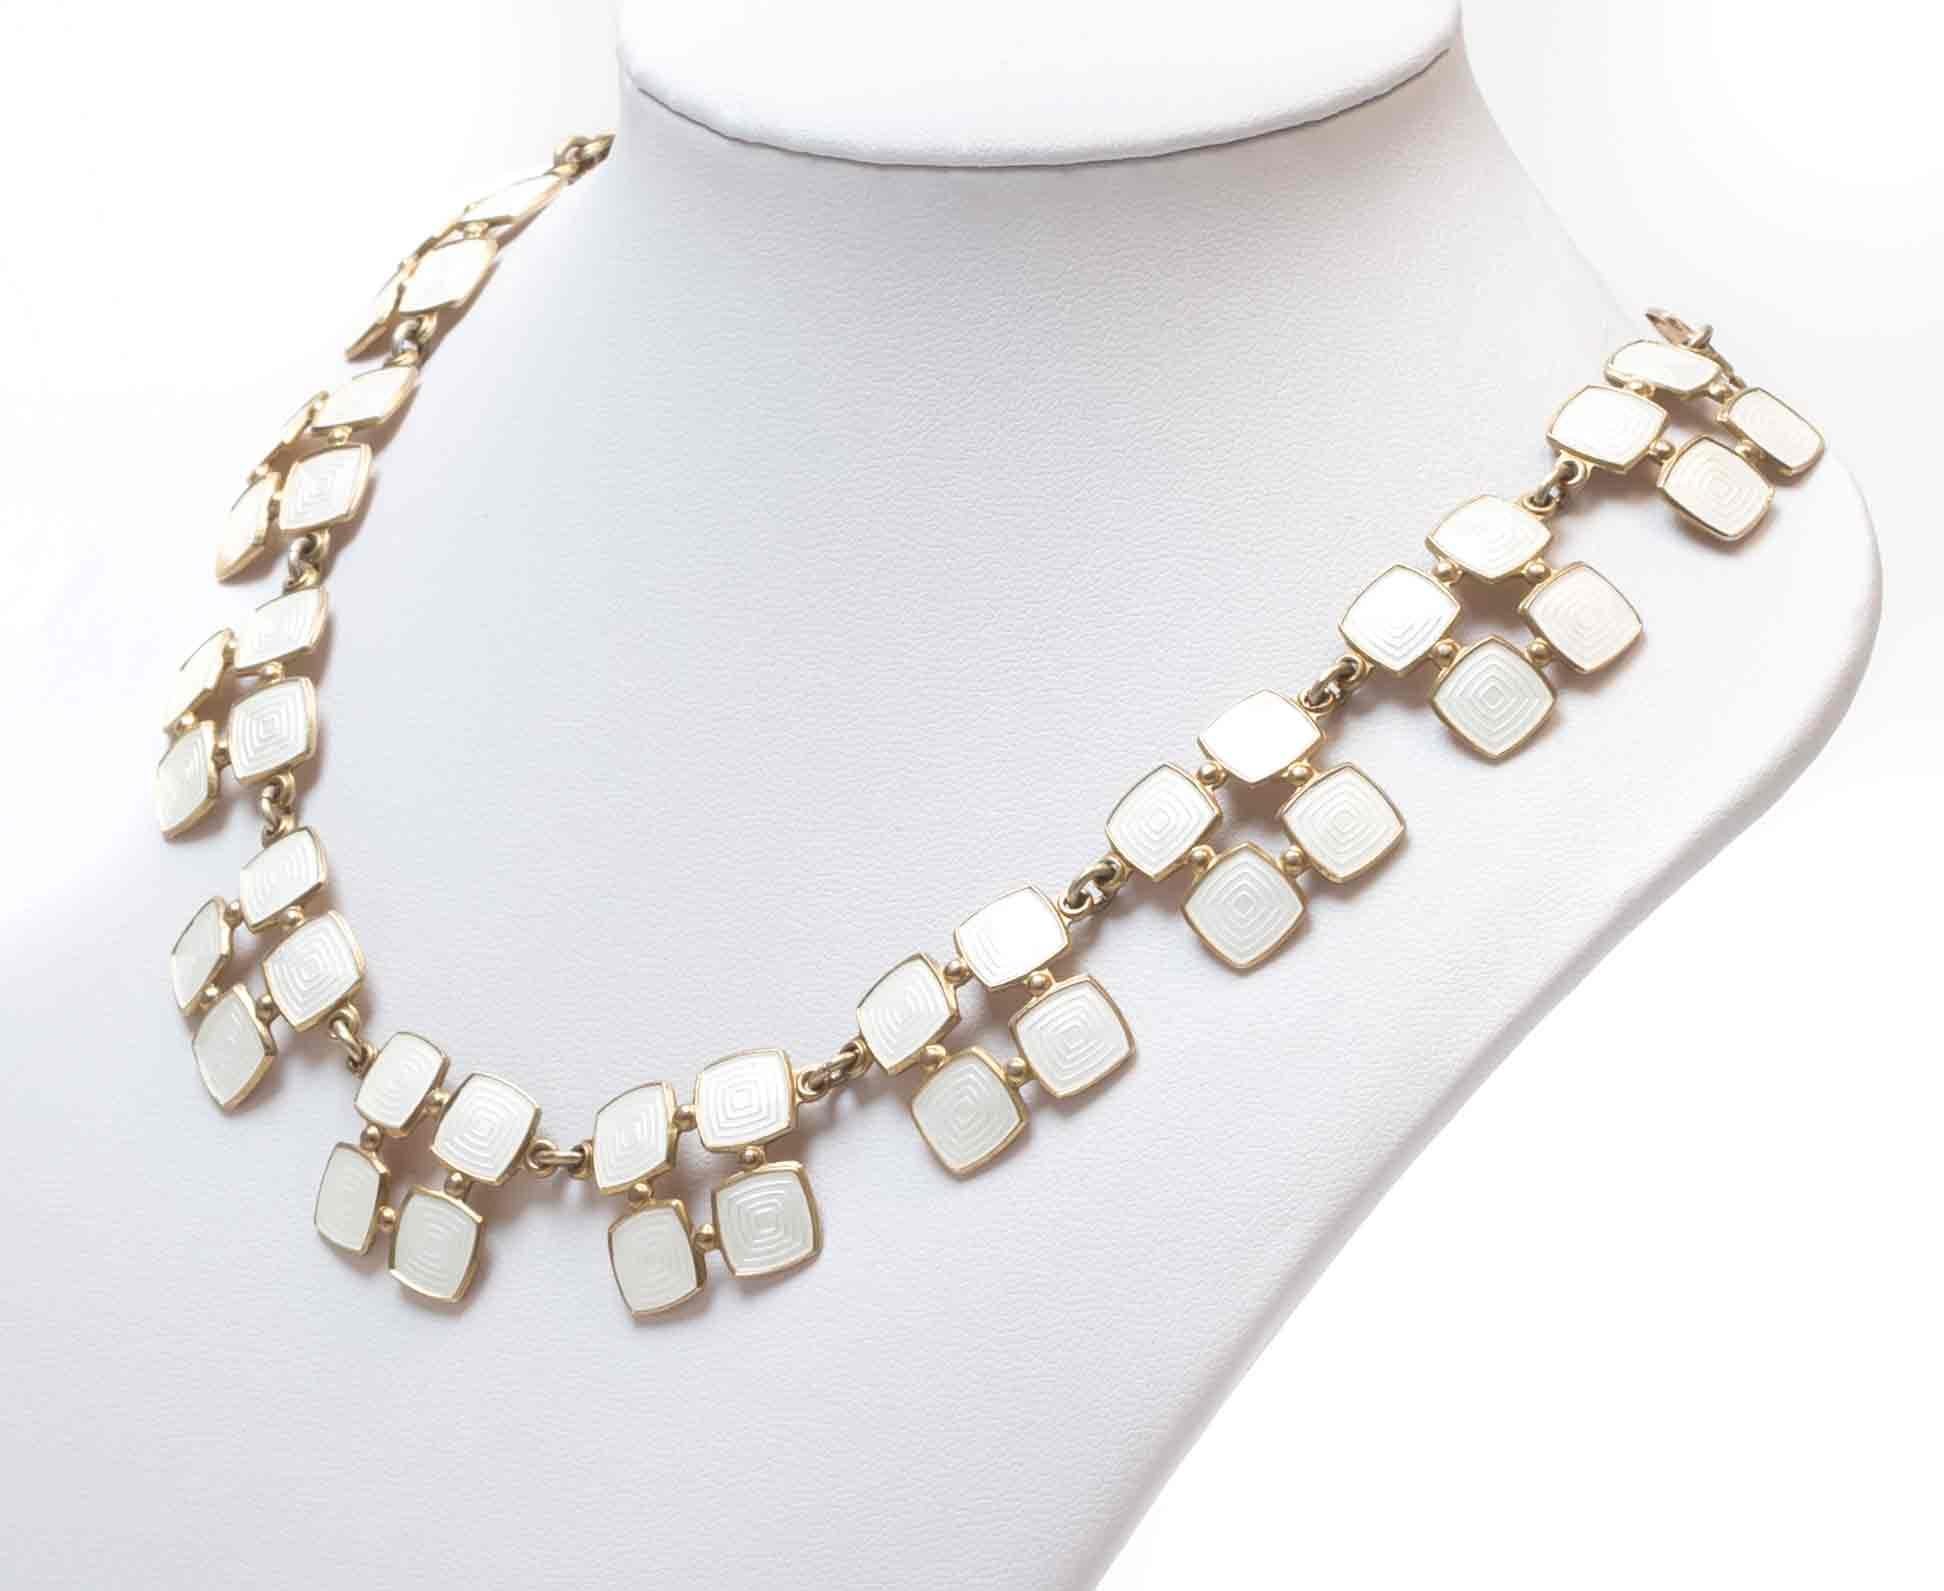 Sublime and organic collier necklace in gilded silver and white enamel. Designed and made by Willy Karlberg, from cirka 1960s second half. The necklace in good vintage condition. By close inspection you can see that one link shows light scratches,